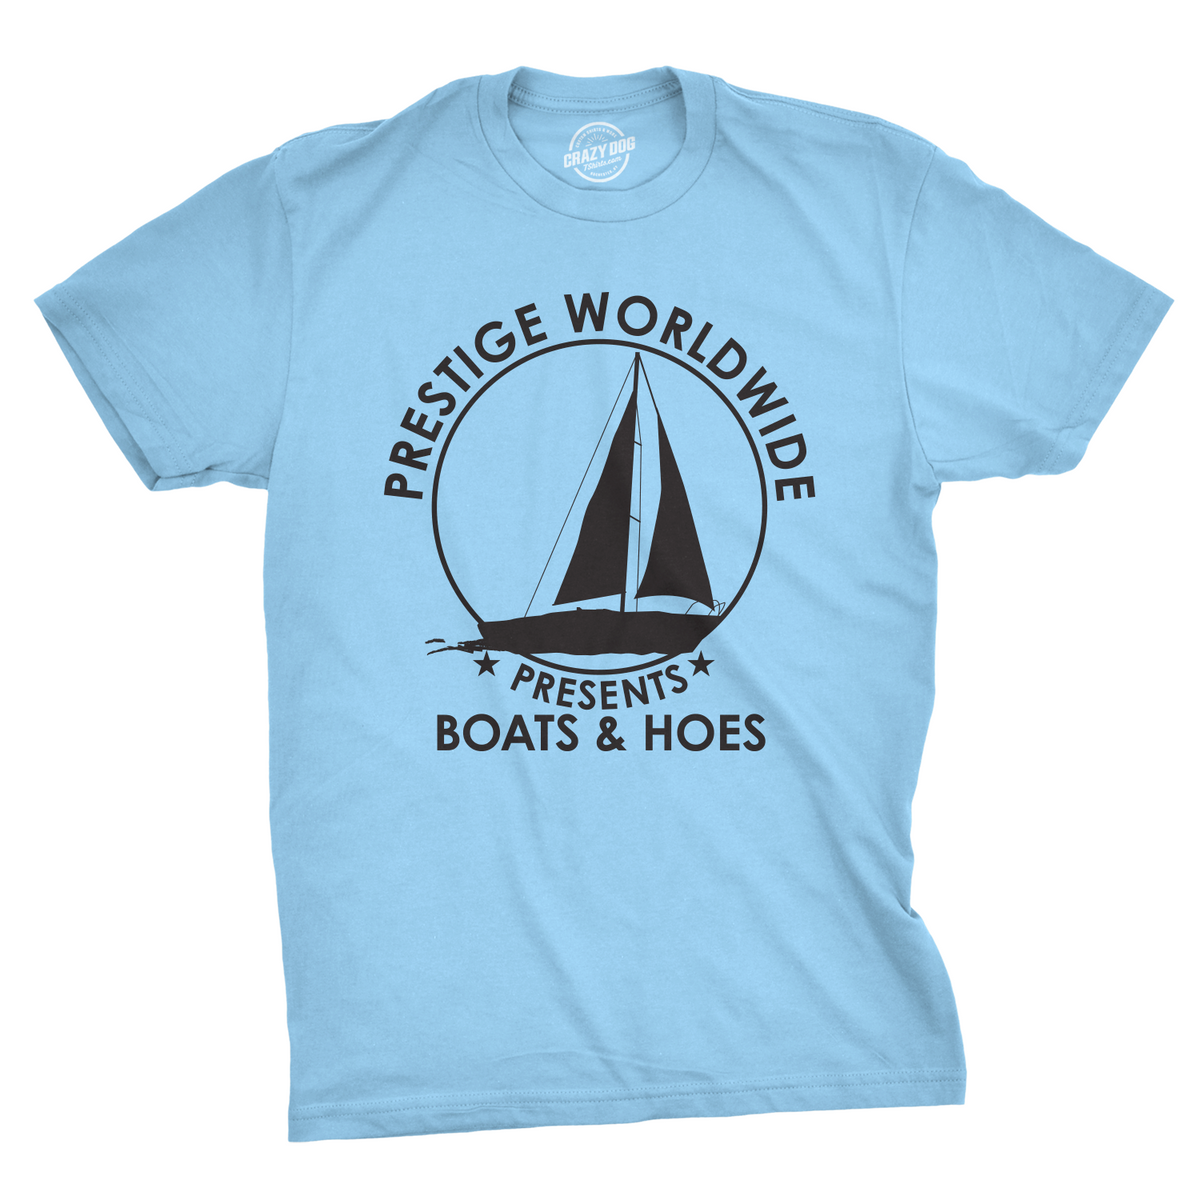 Funny Heather Light Blue Prestige Worldwide Boats &amp; Hoes Mens T Shirt Nerdy TV &amp; Movies Tee